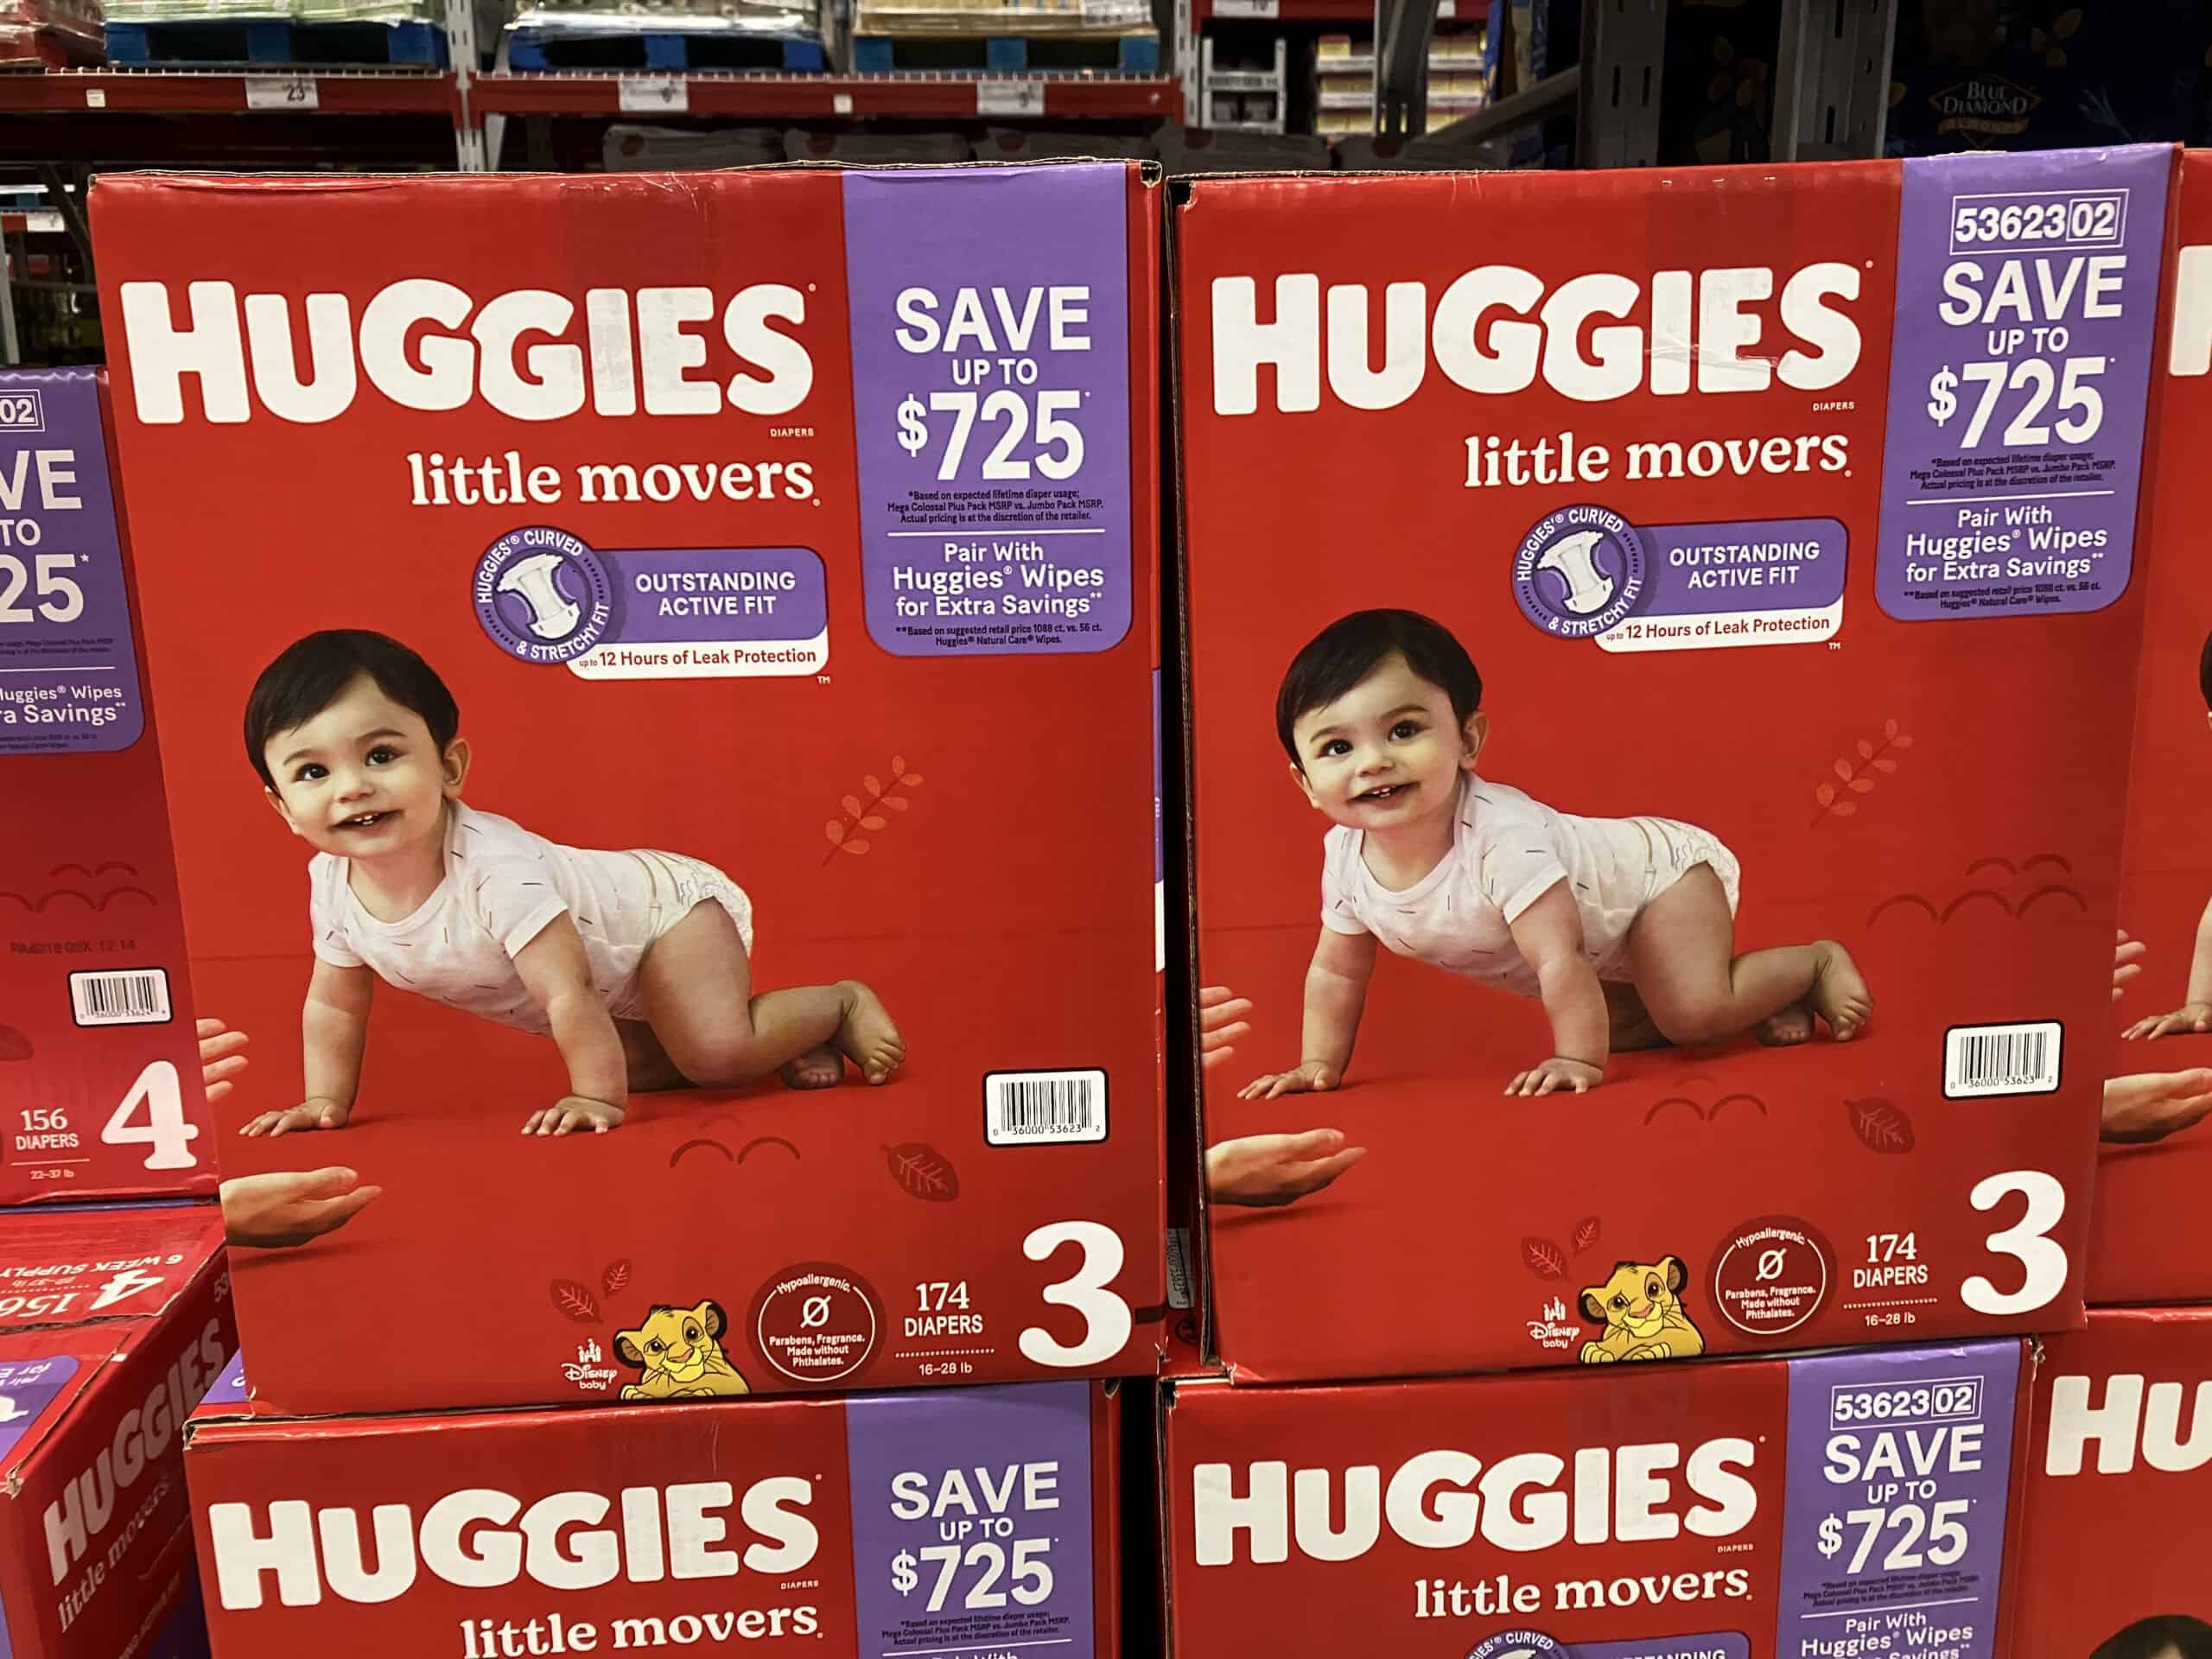 Huggies Little Movers diapers